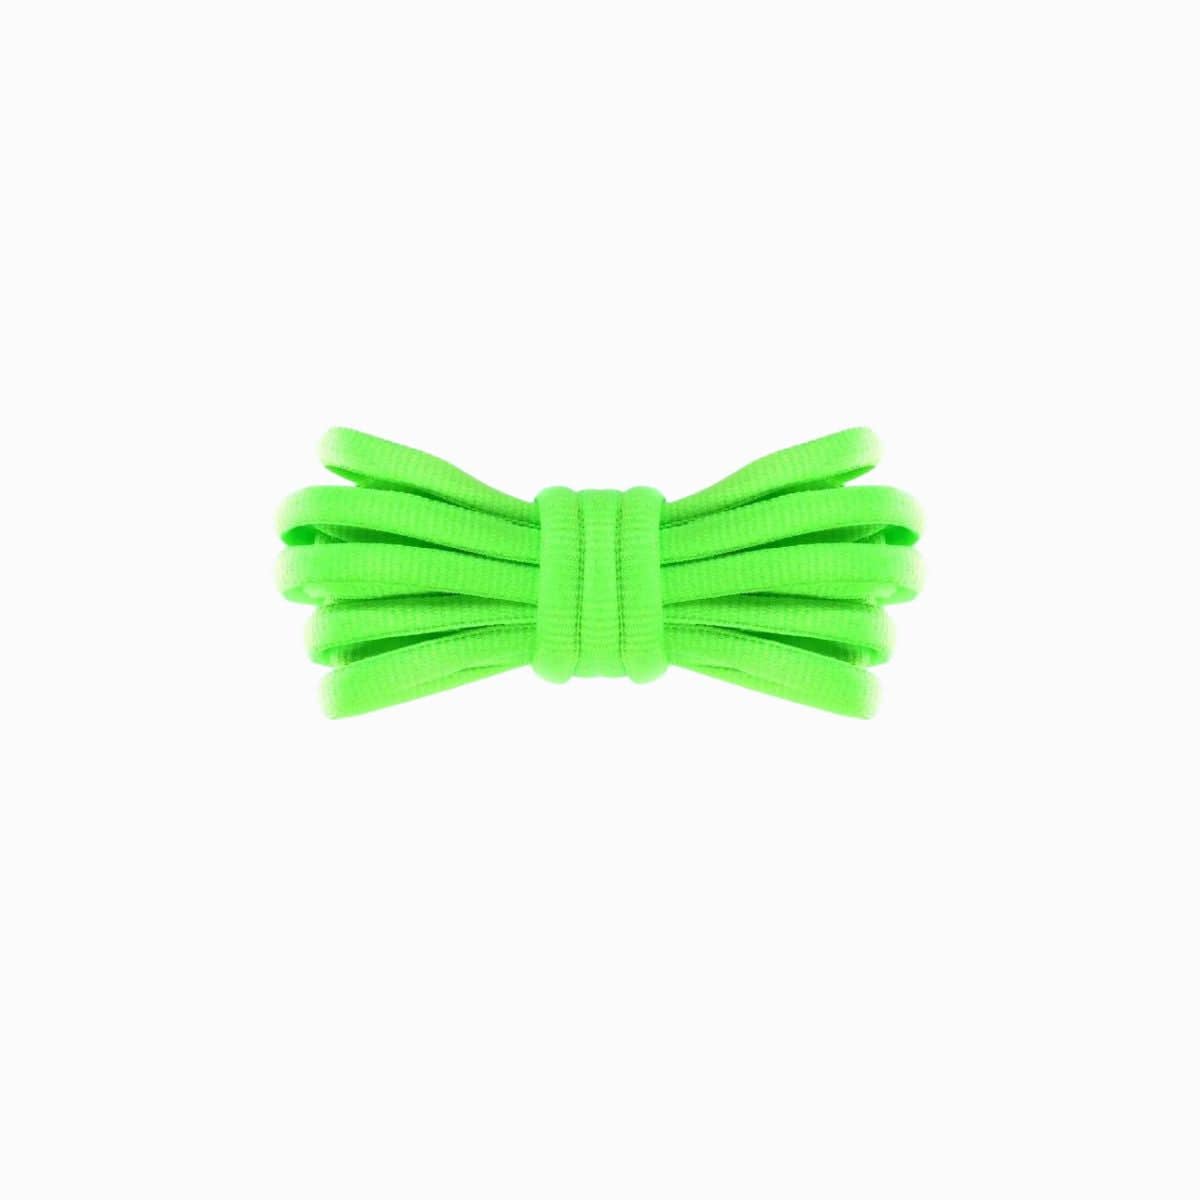 Fluorescent Green Replacement Adidas Shoe Laces for Adidas Spezial Sneakers by Kicks Shoelaces